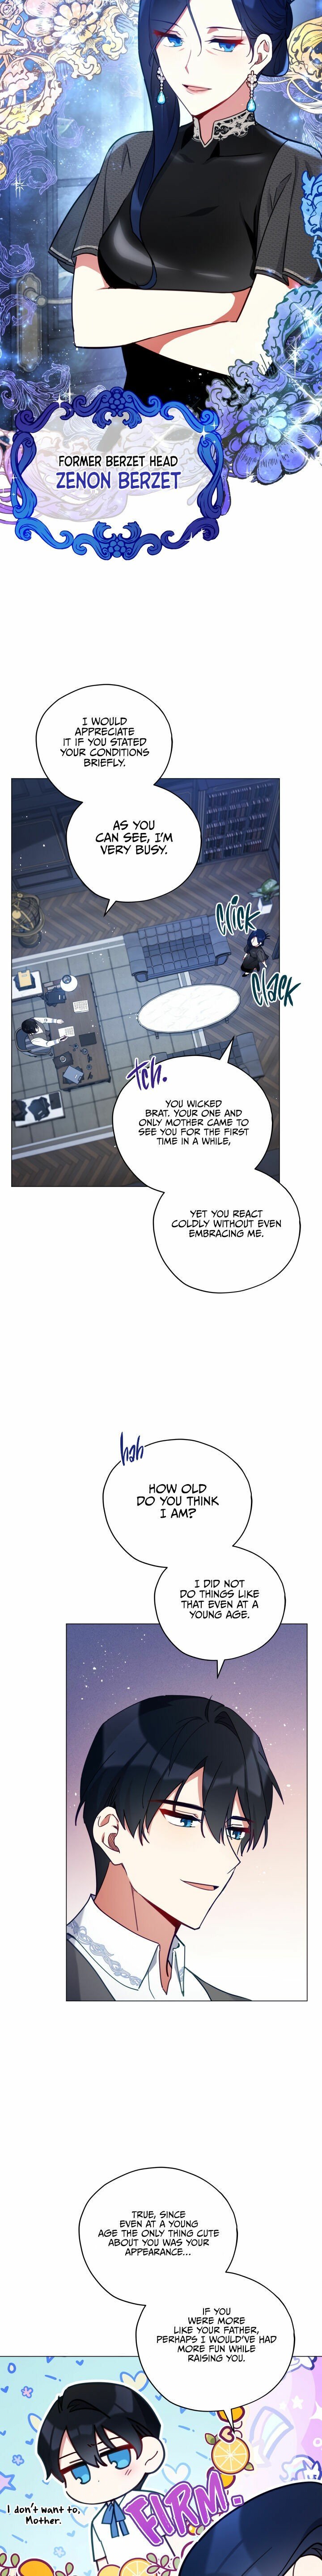 Untouchable Lady Chapter 28 - Page 6